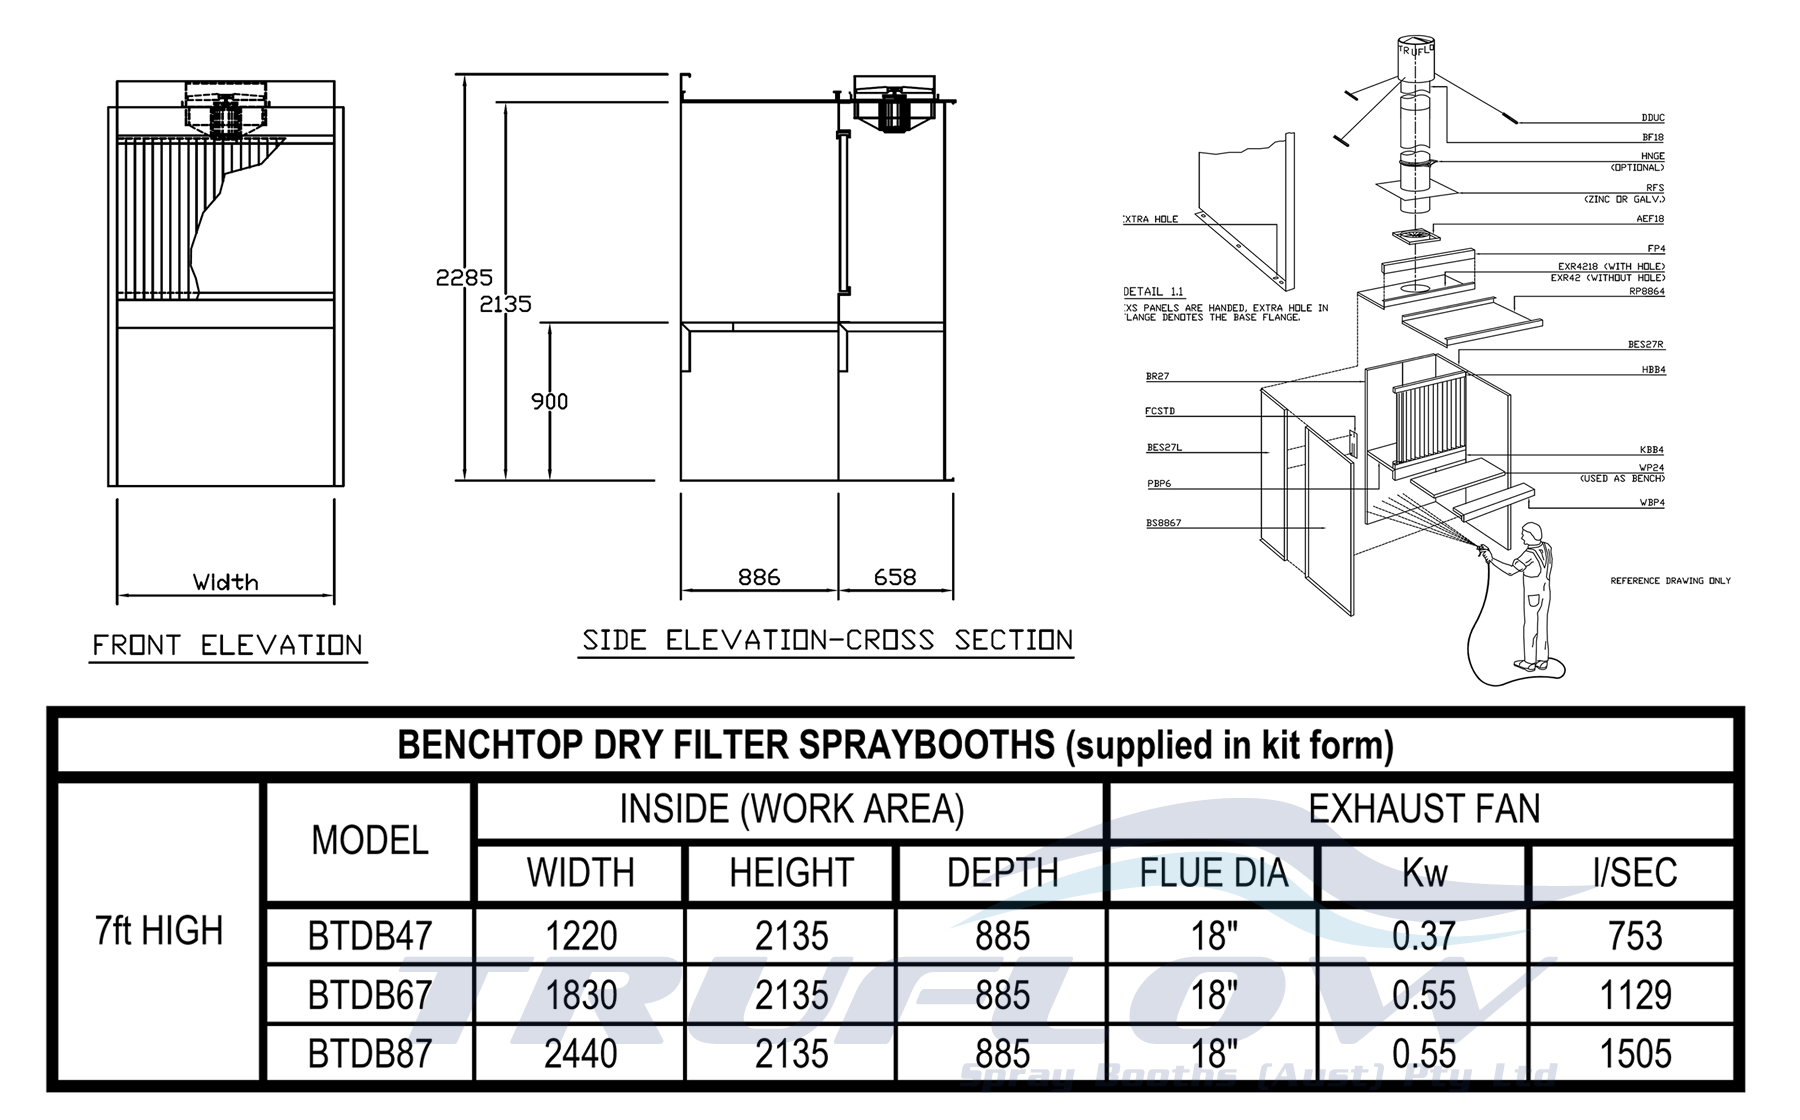 Model Selection for Bench Type Dry Booth